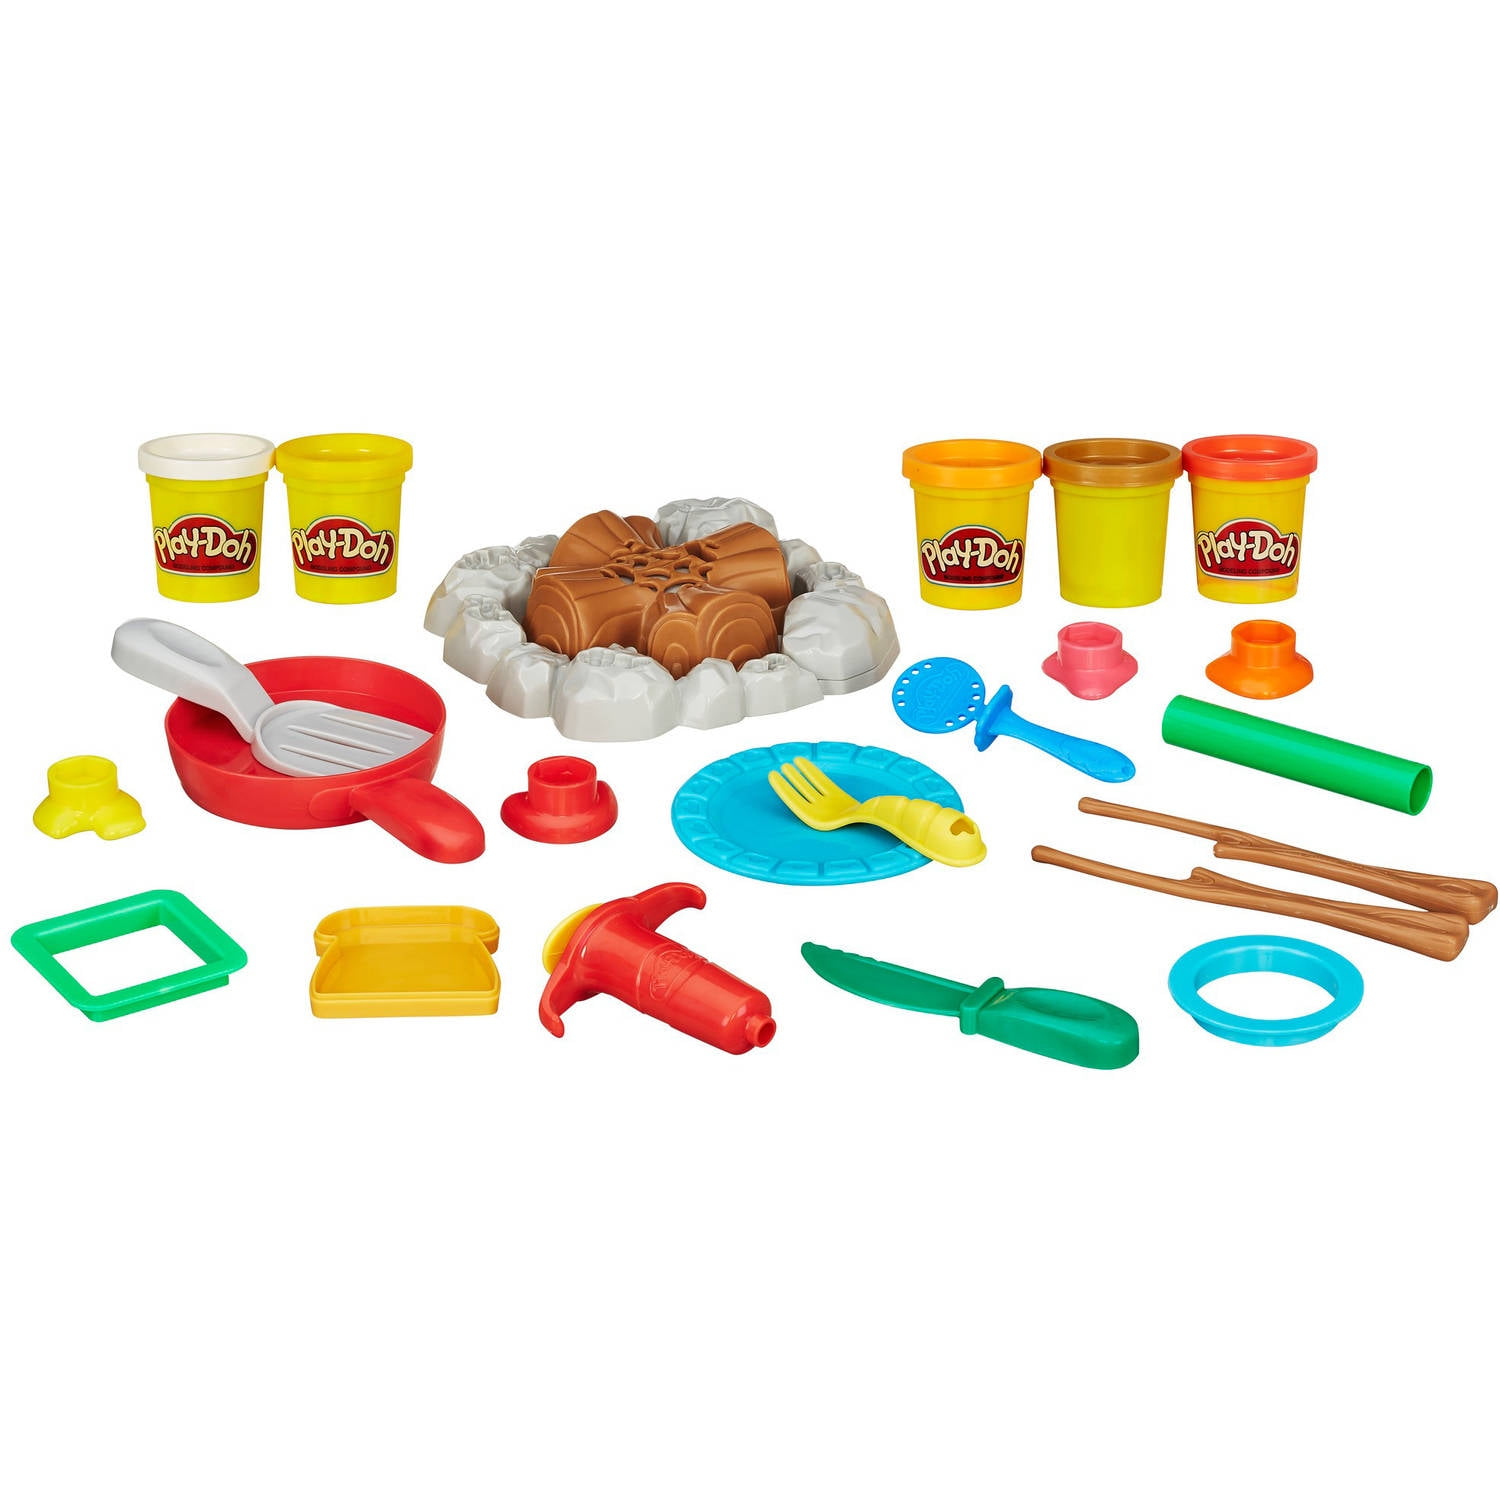  Play-Doh Campfire Playset $5.99 Shipped (+ More Play-Doh Deals!)